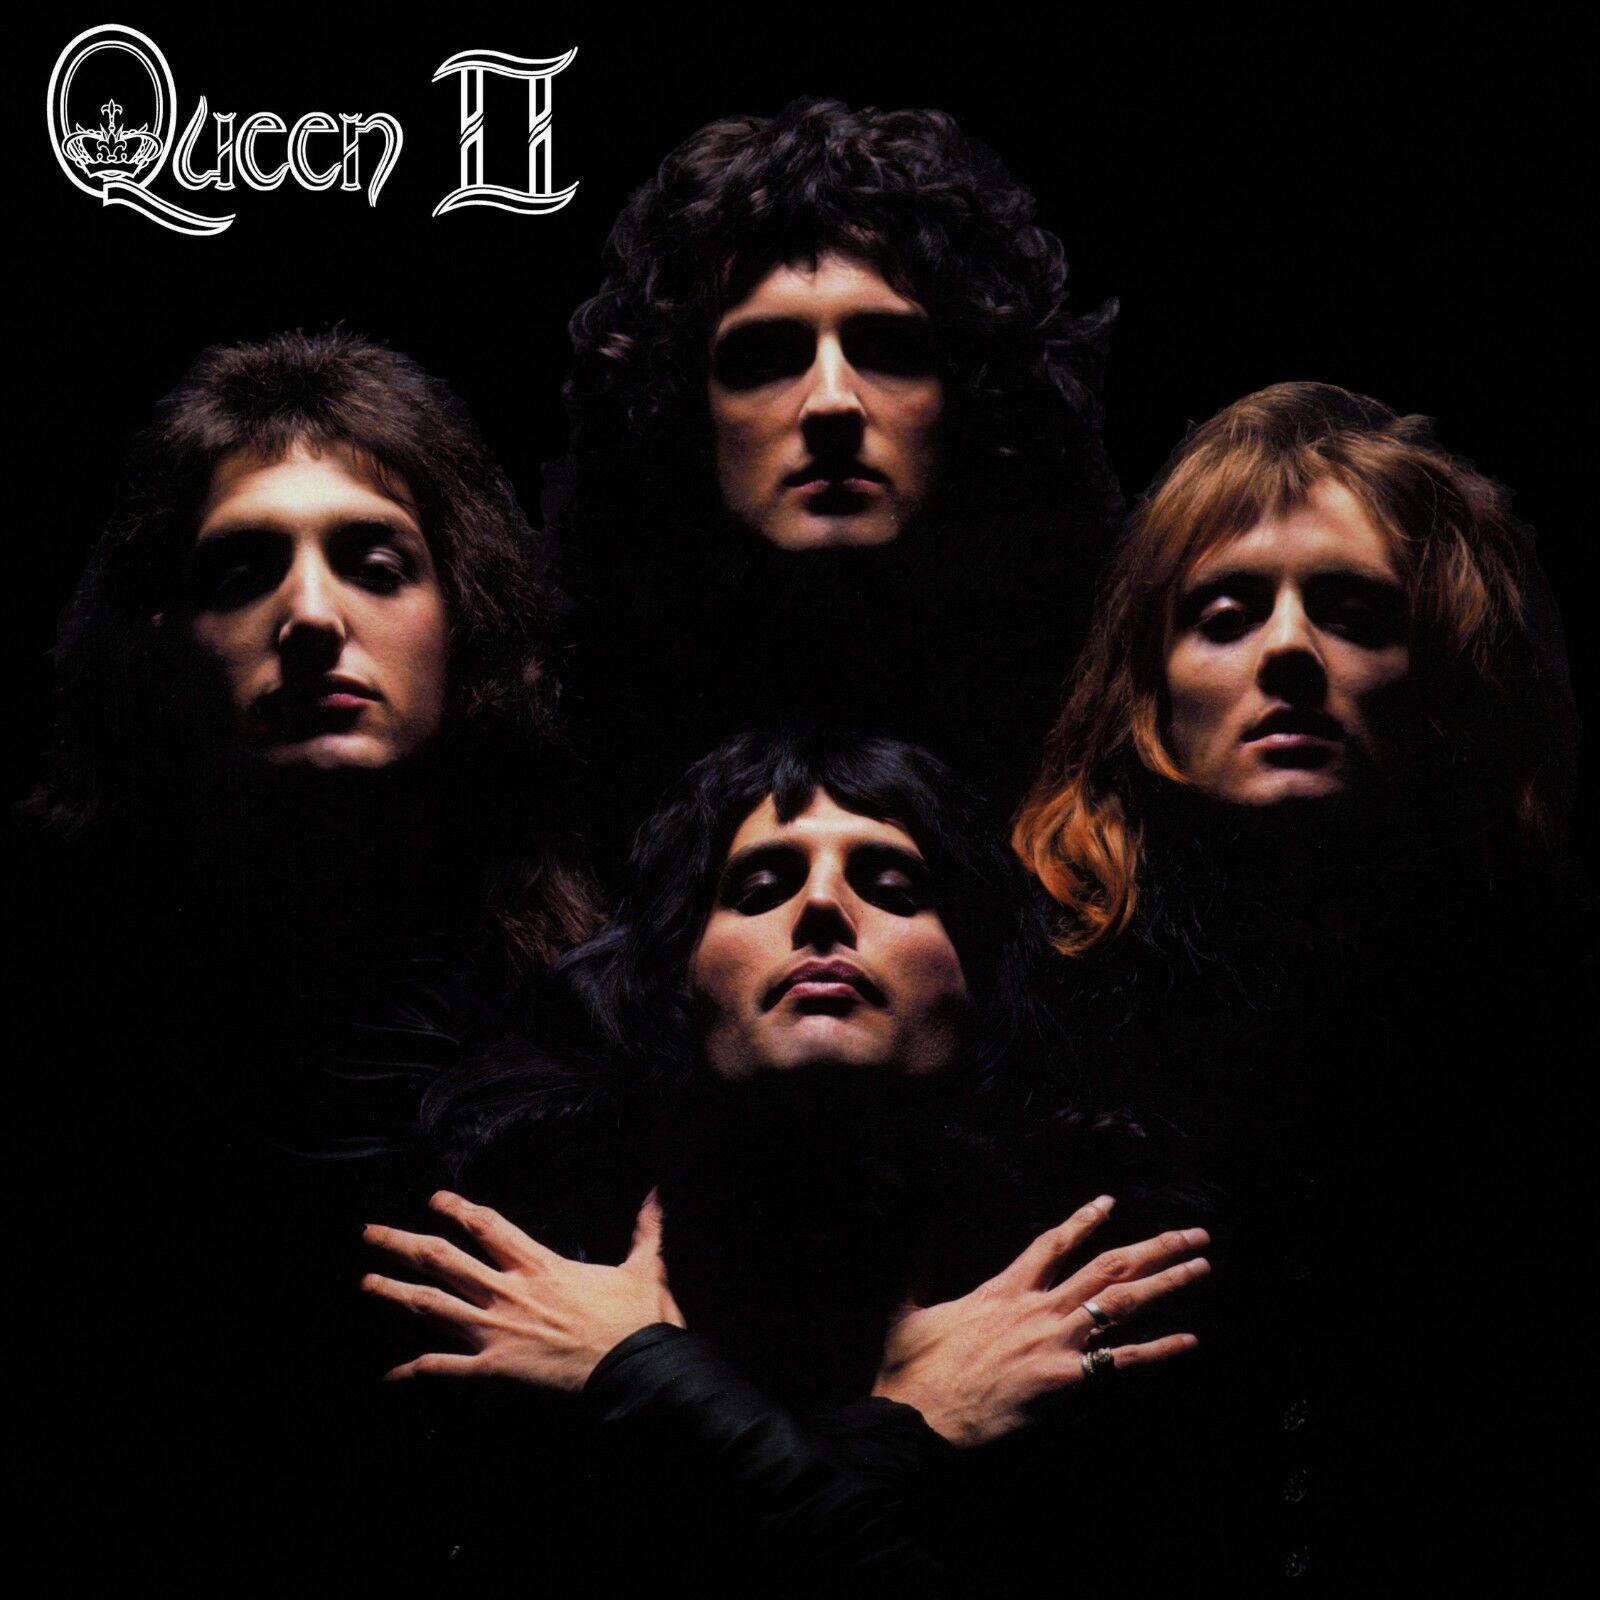 2/4/23-Queen used to be mad at singing fans!